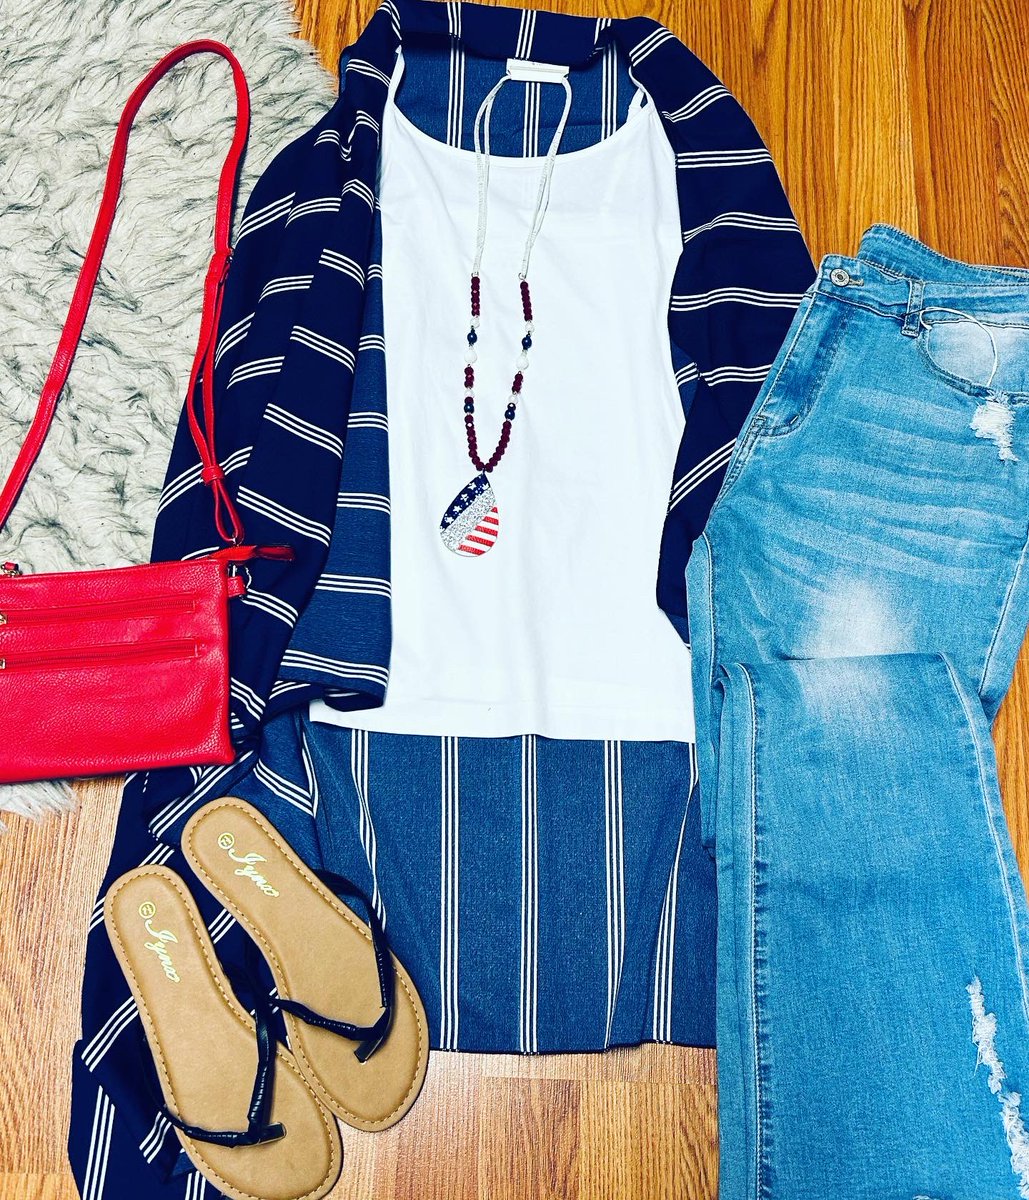 July 4th outfits 💙🇺🇸❤️ 

We’re open Wednesday til 5pm, Thursday 12-7, Friday 12-5, Saturday 10-2! 

📍4 East Main Street, Pittsboro, IN
sugarbabesboutique.net 

#shopSBB #boutiqueshopping #july4th #america #cuteclothes #localboutique #inhendricks #pittsboroindiana